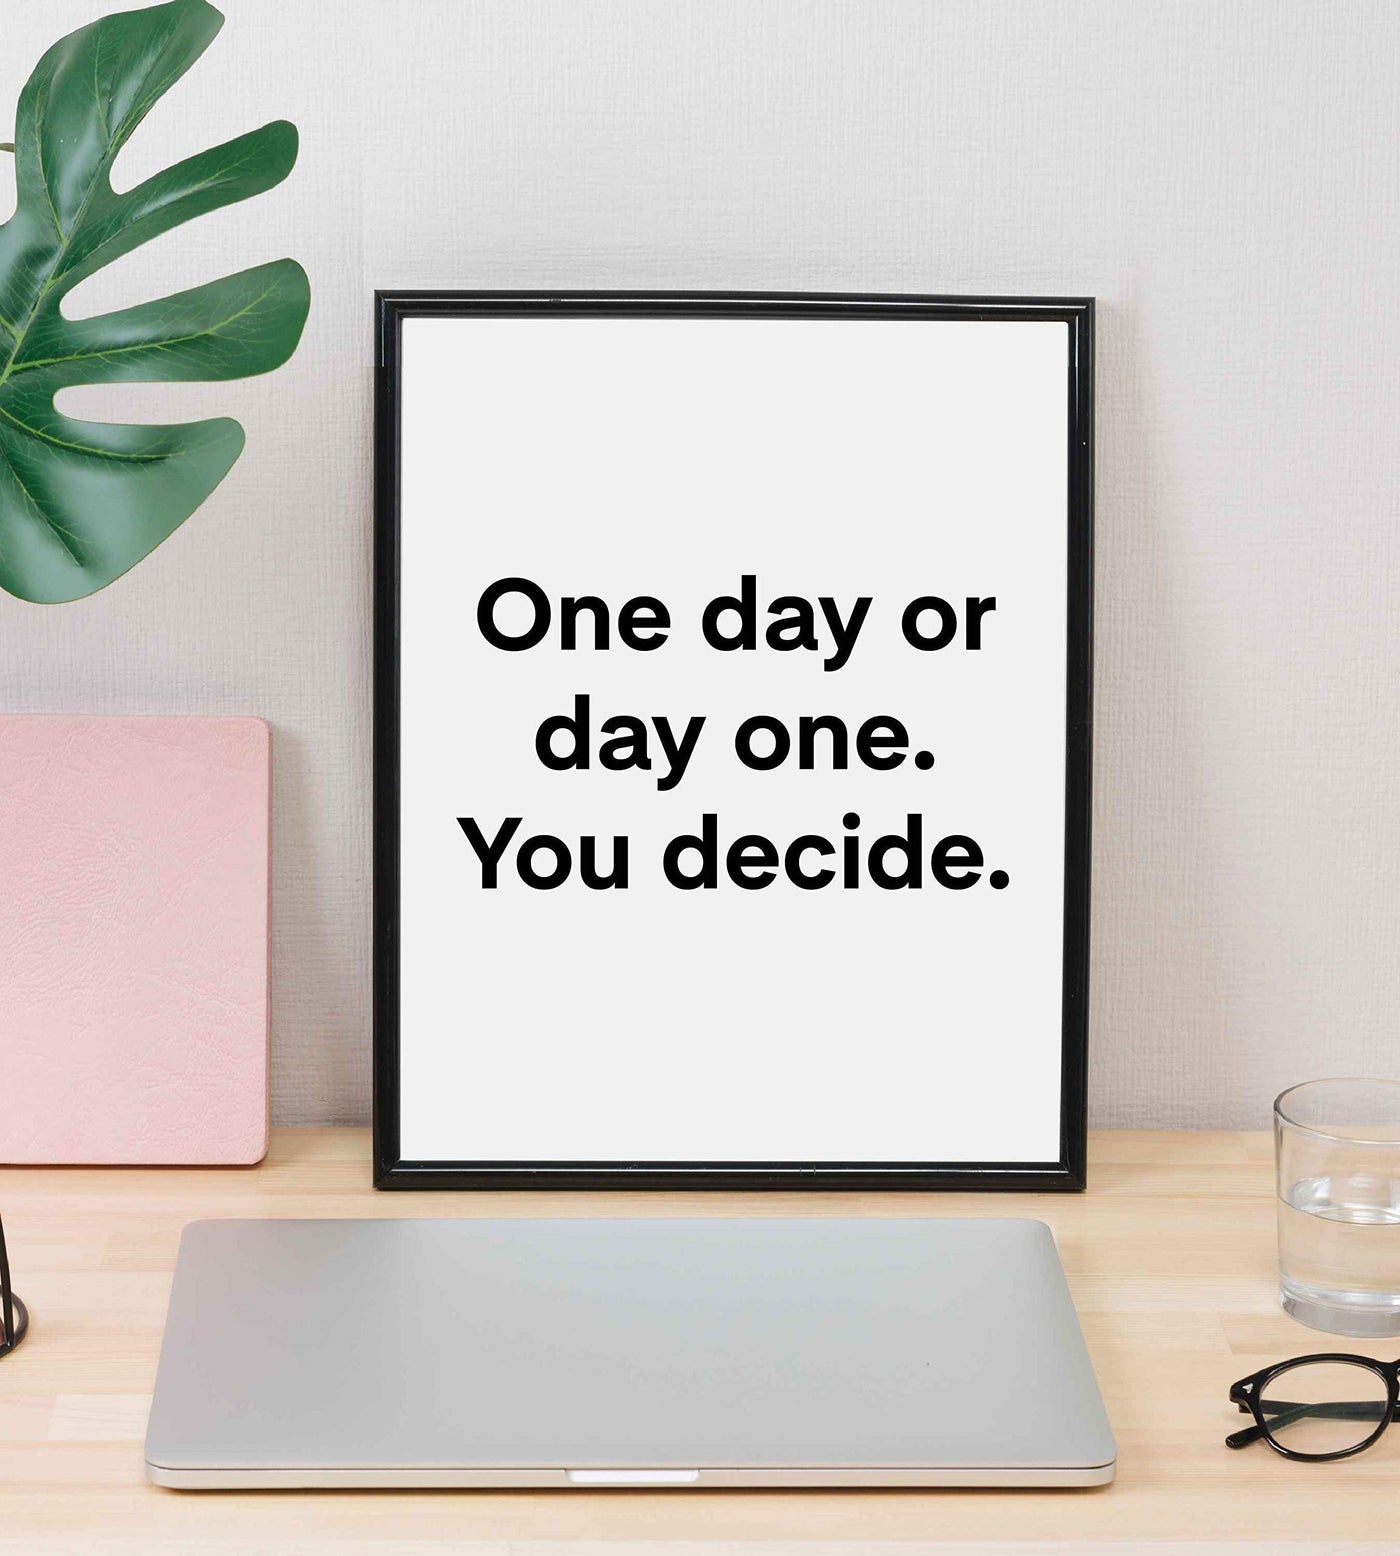 ?One Day or Day One-You Decide? Motivational Quotes Wall Art -8 x 10" Modern Typographic Poster Print-Ready to Frame. Inspirational Decor for Home-Office-School-Gym. Great Sign for Motivation!